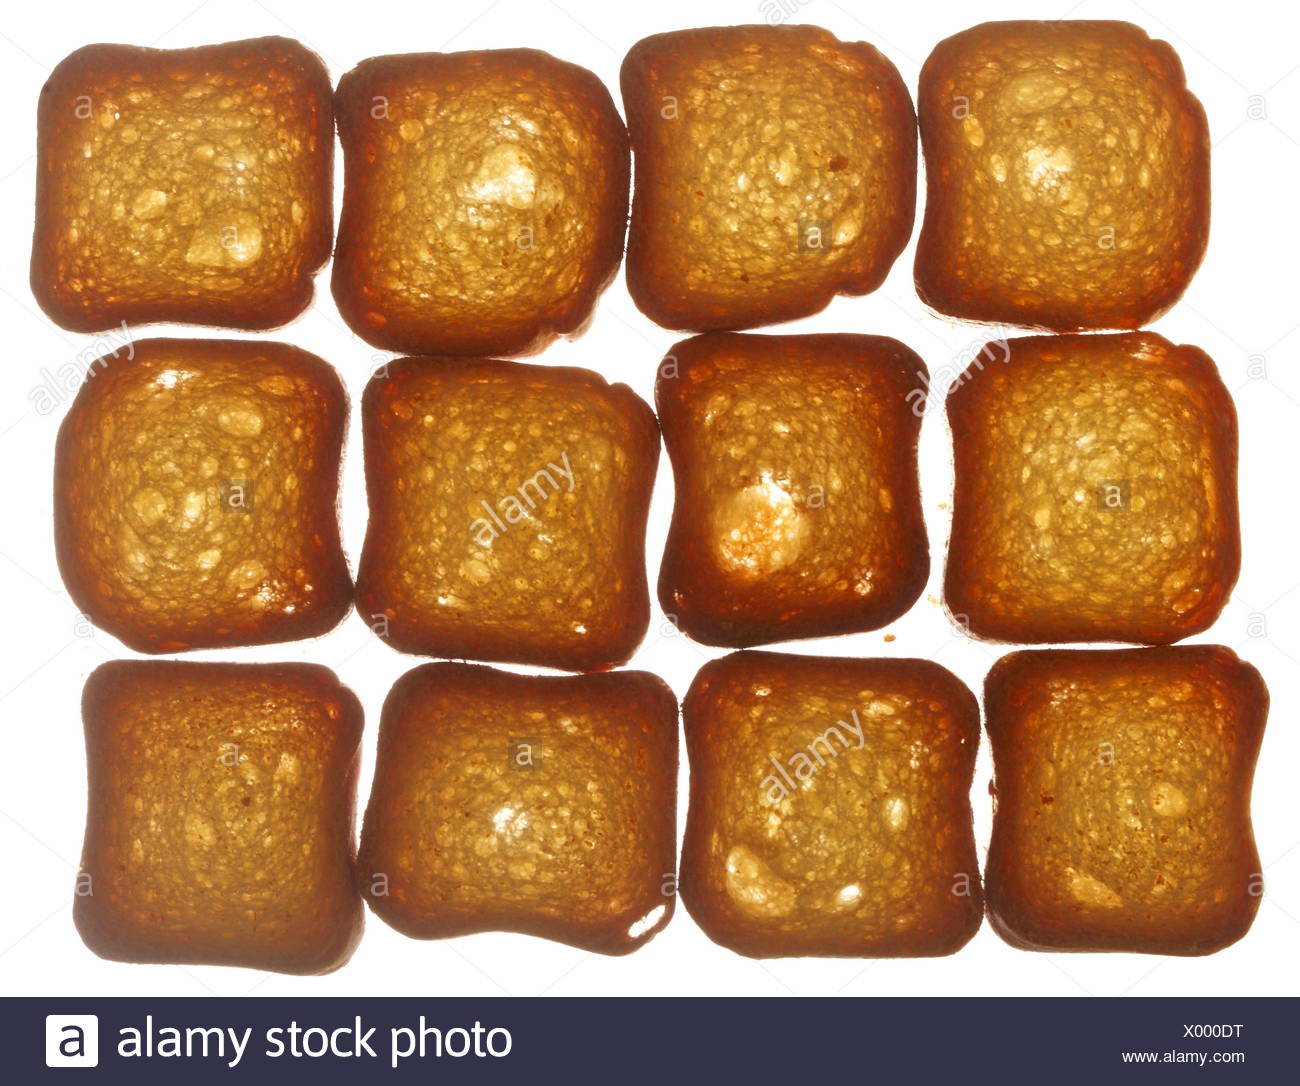 Many Small Dried Rusks Bread Loaf Toast Biscuits As Texture